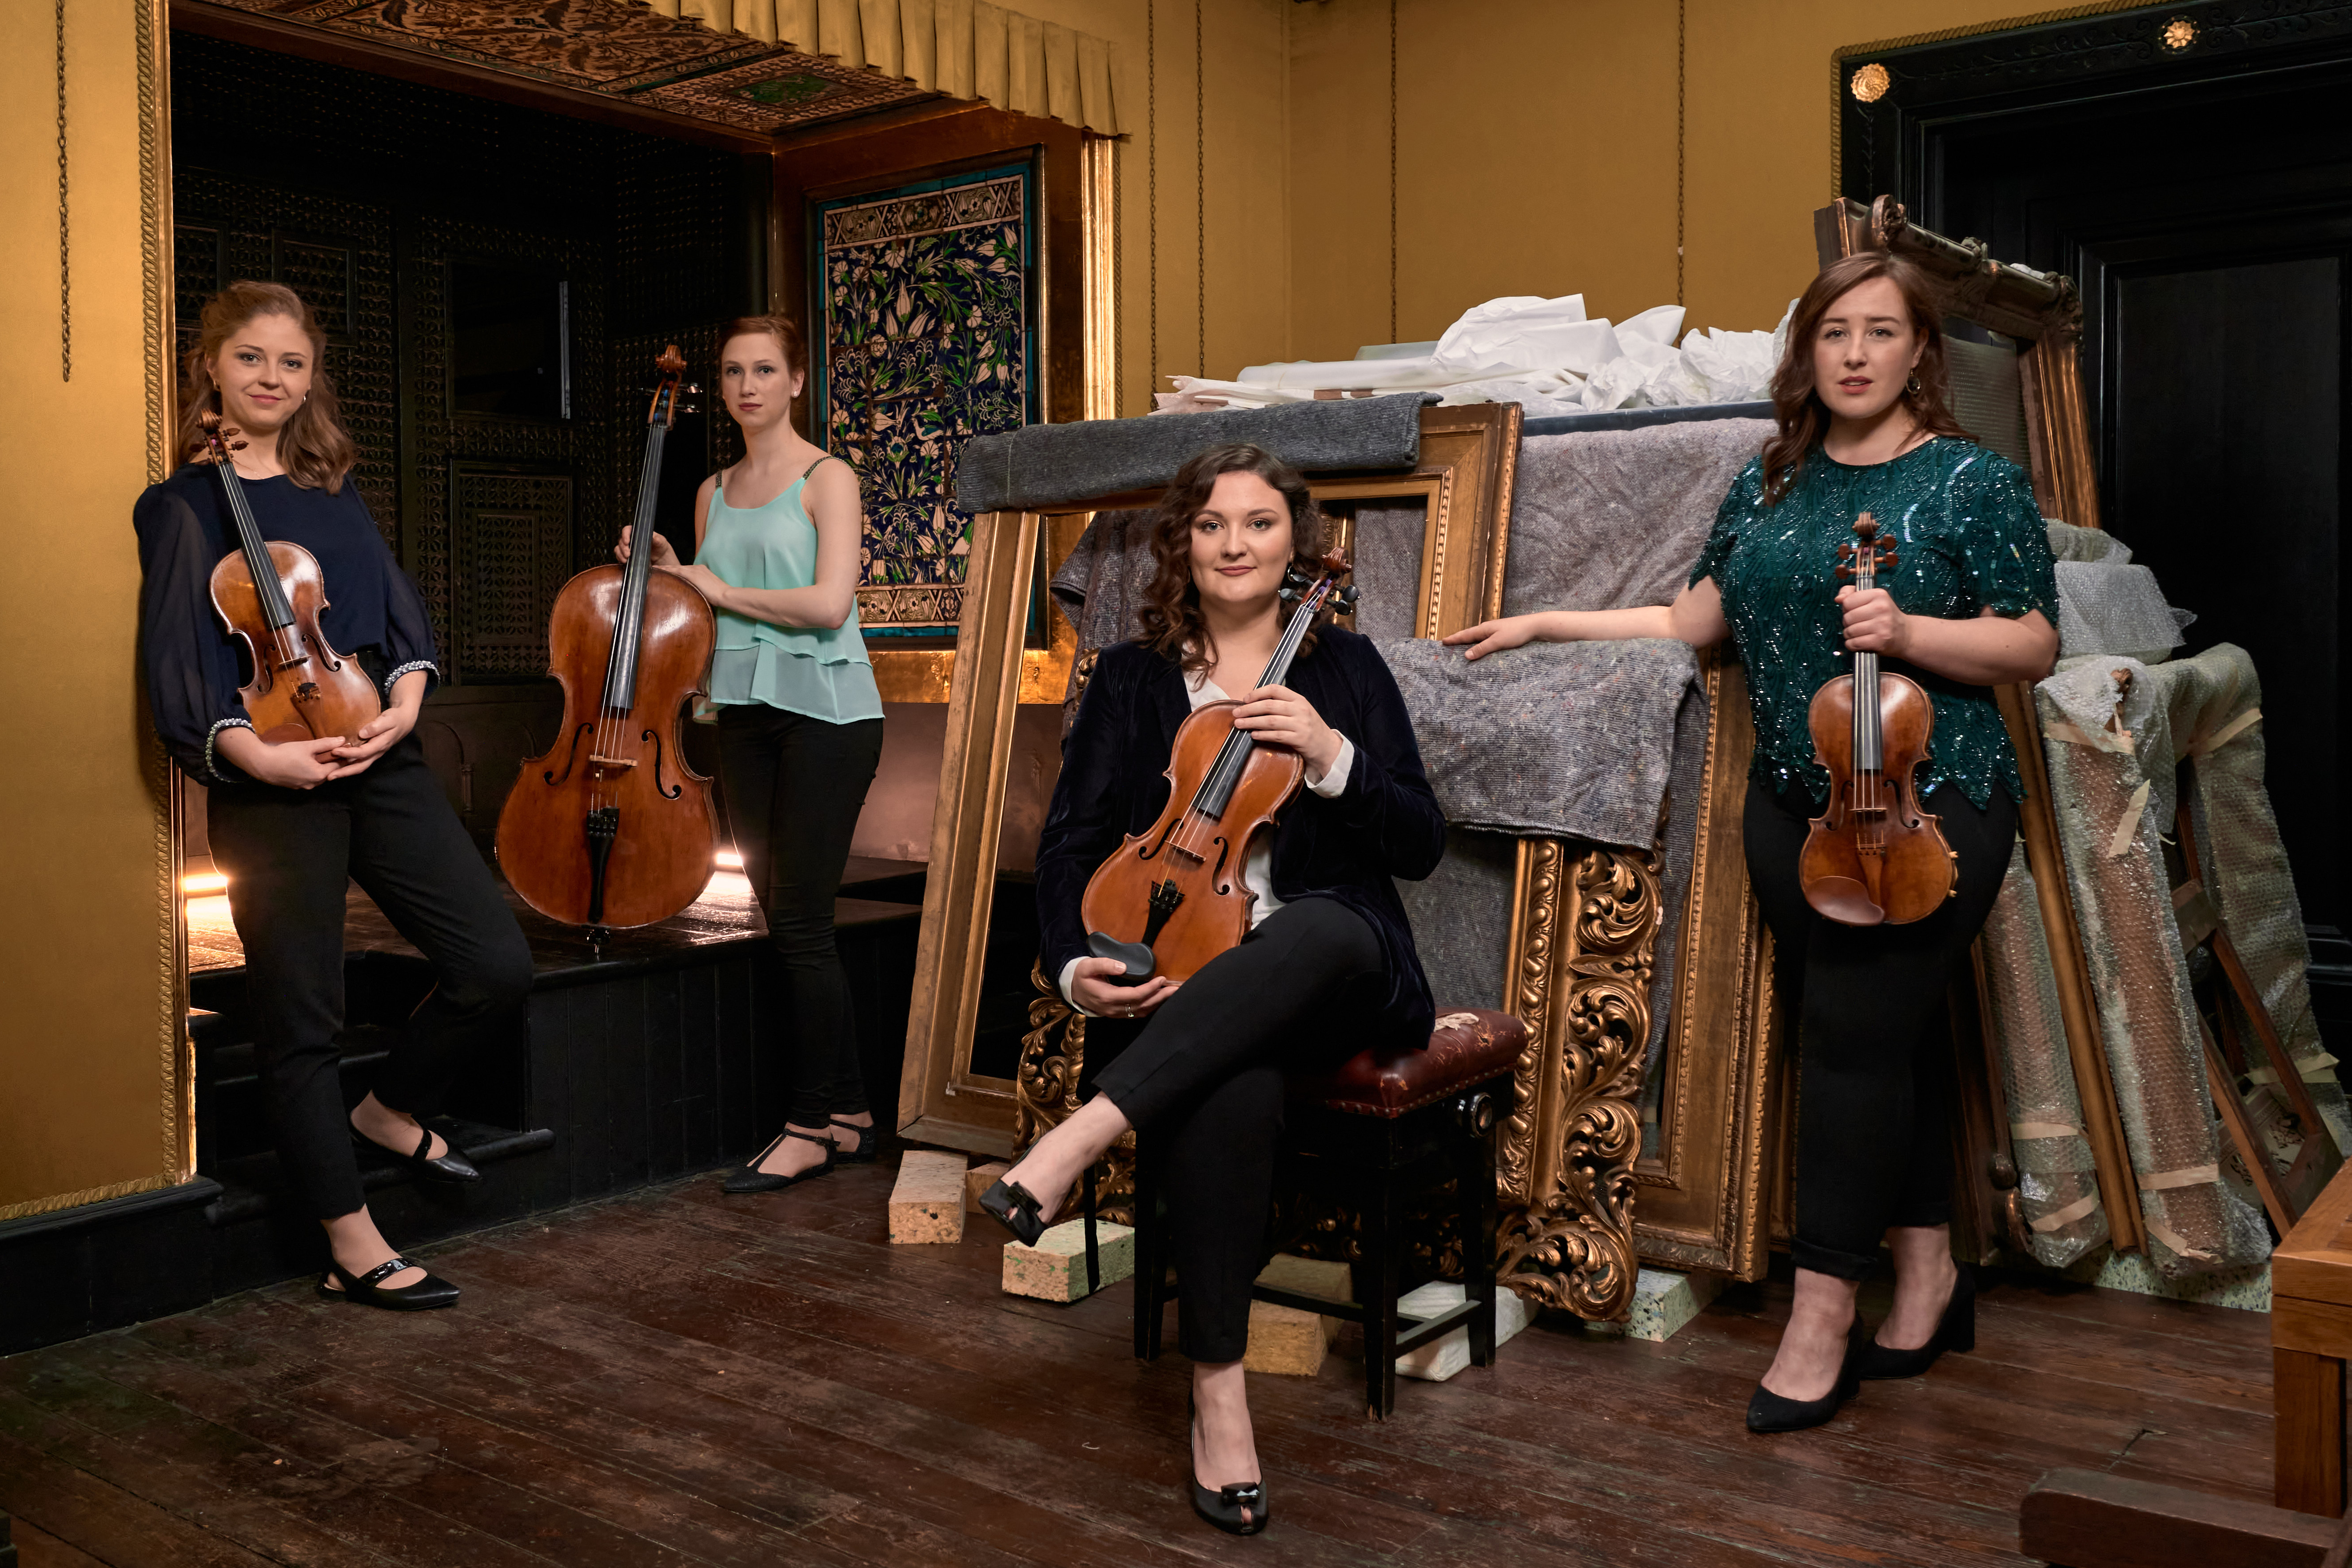 A string quartet standing in an ornate room in front of picture frames holding their instruments